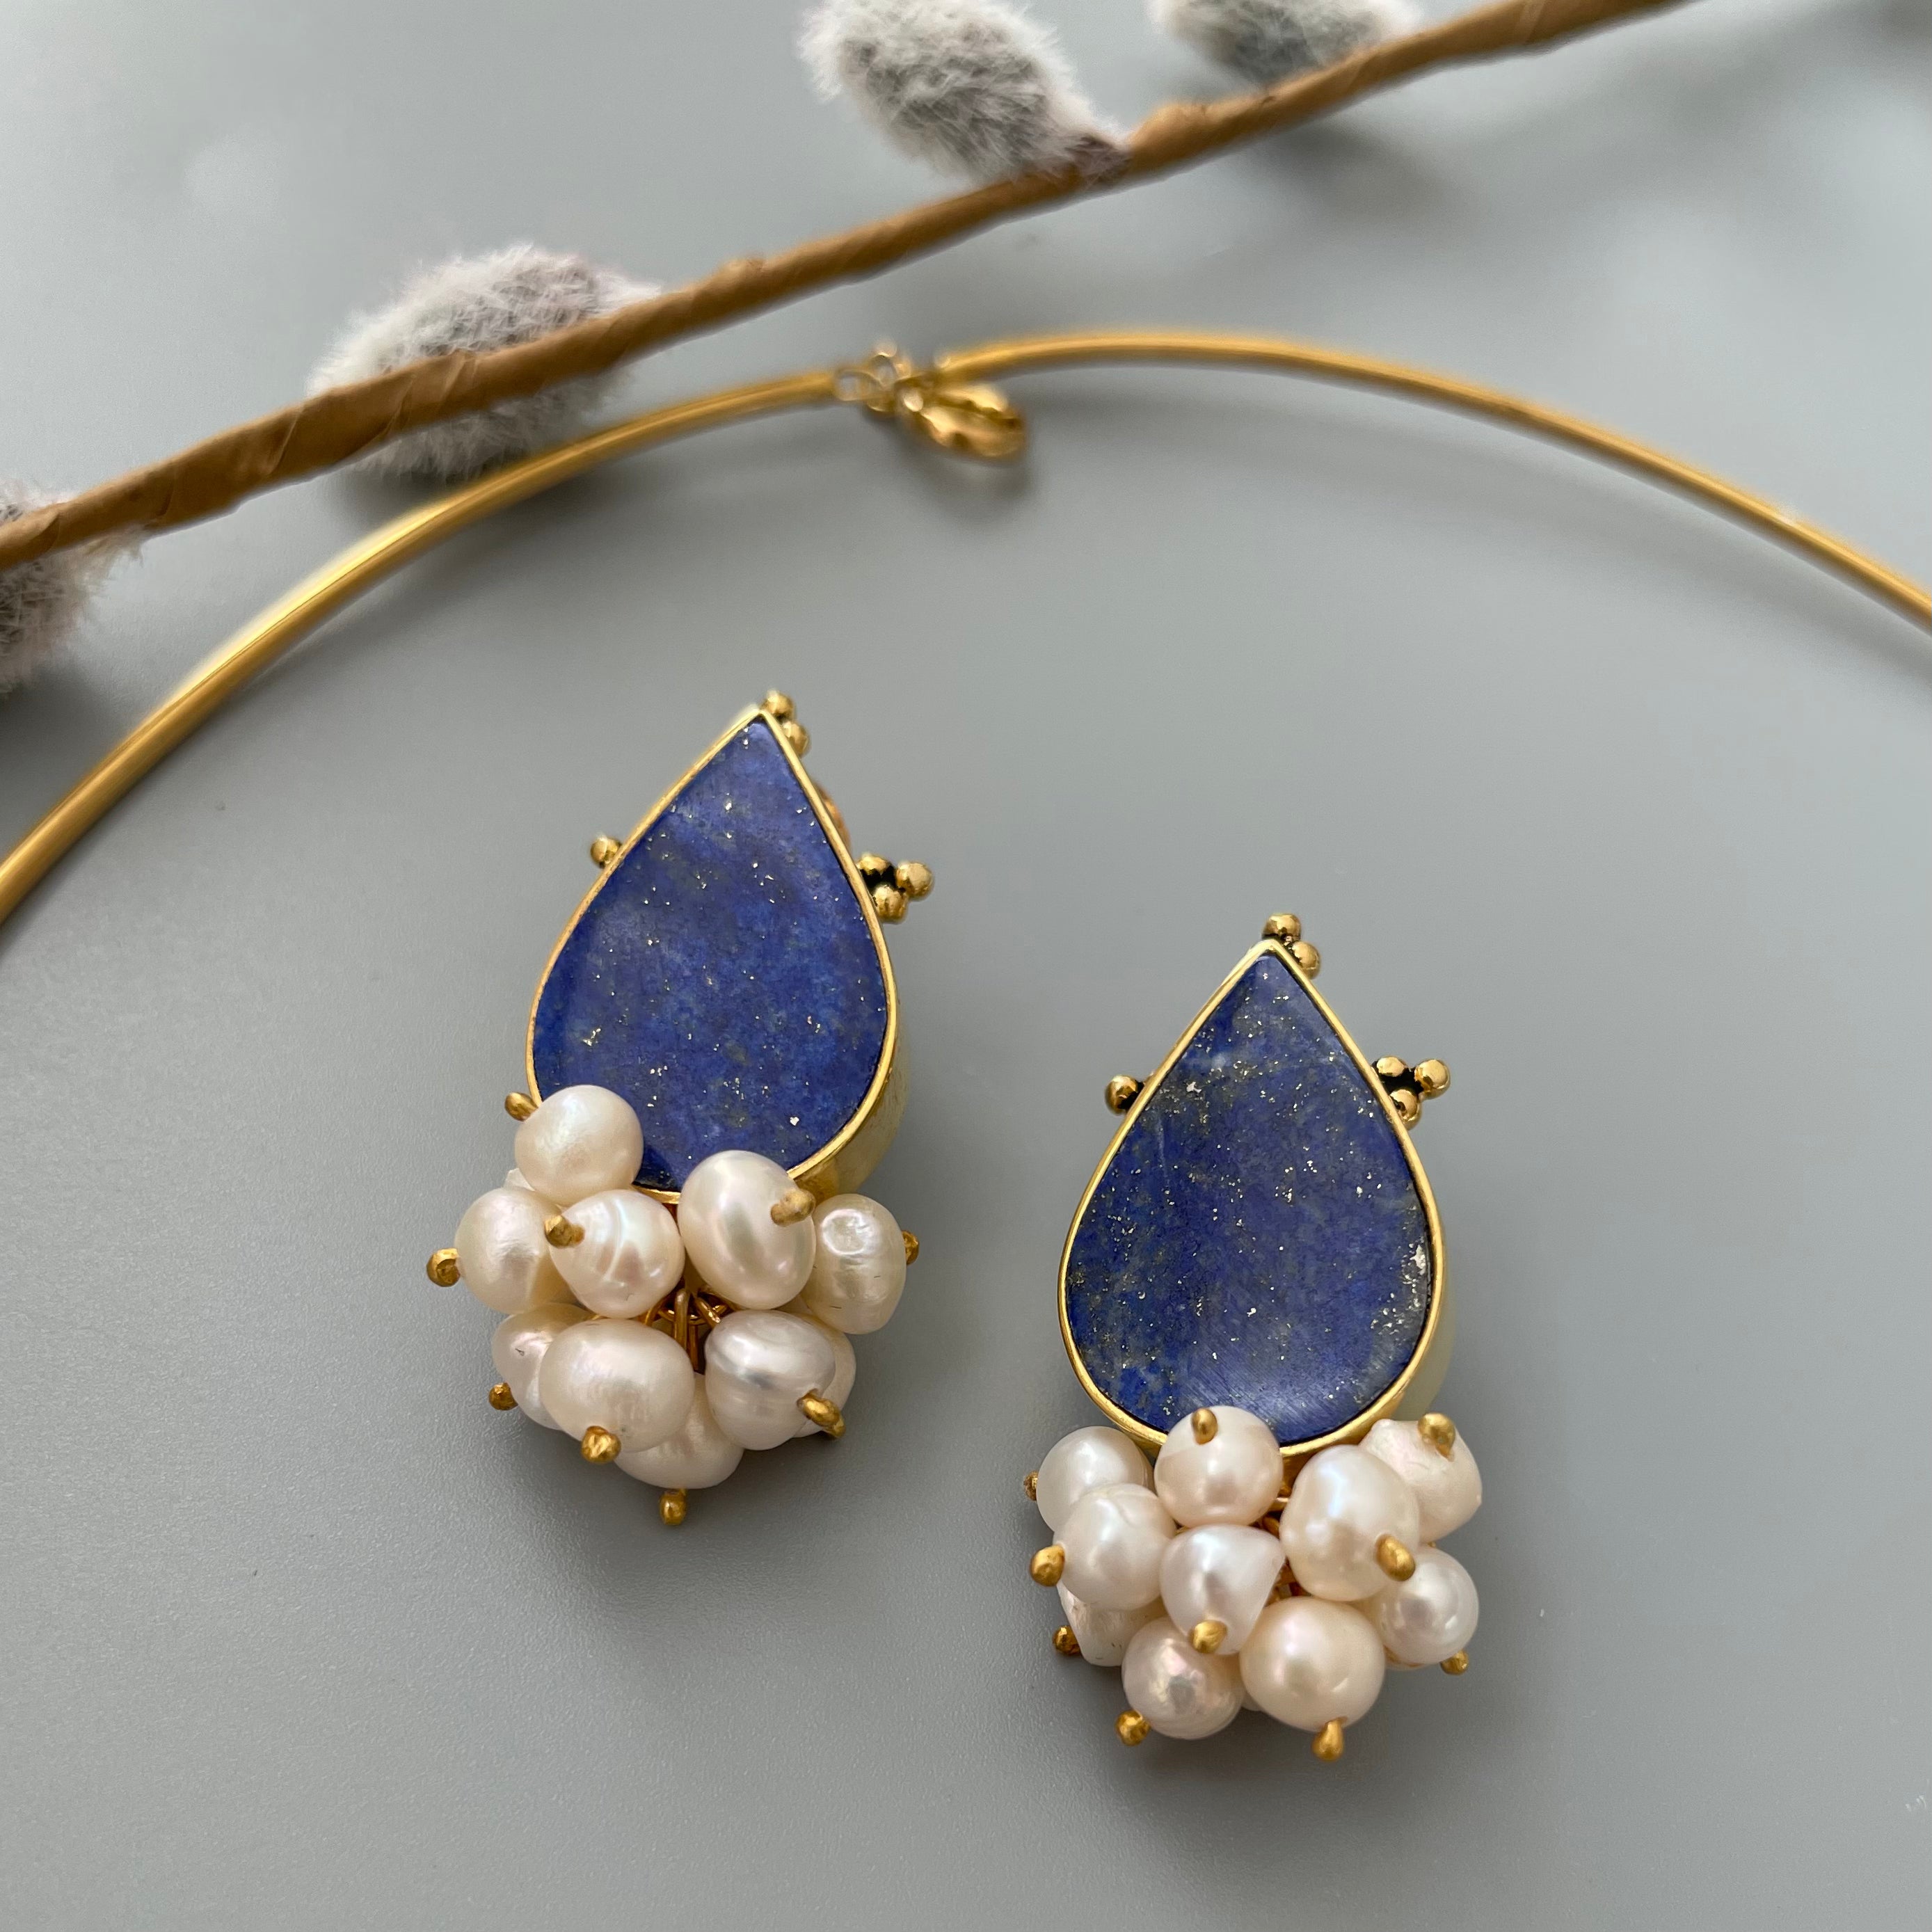 Persian Earrings-Handmade Silver Set with Natural Lapis:Persian Jewelry-AFRA ART GALLERY